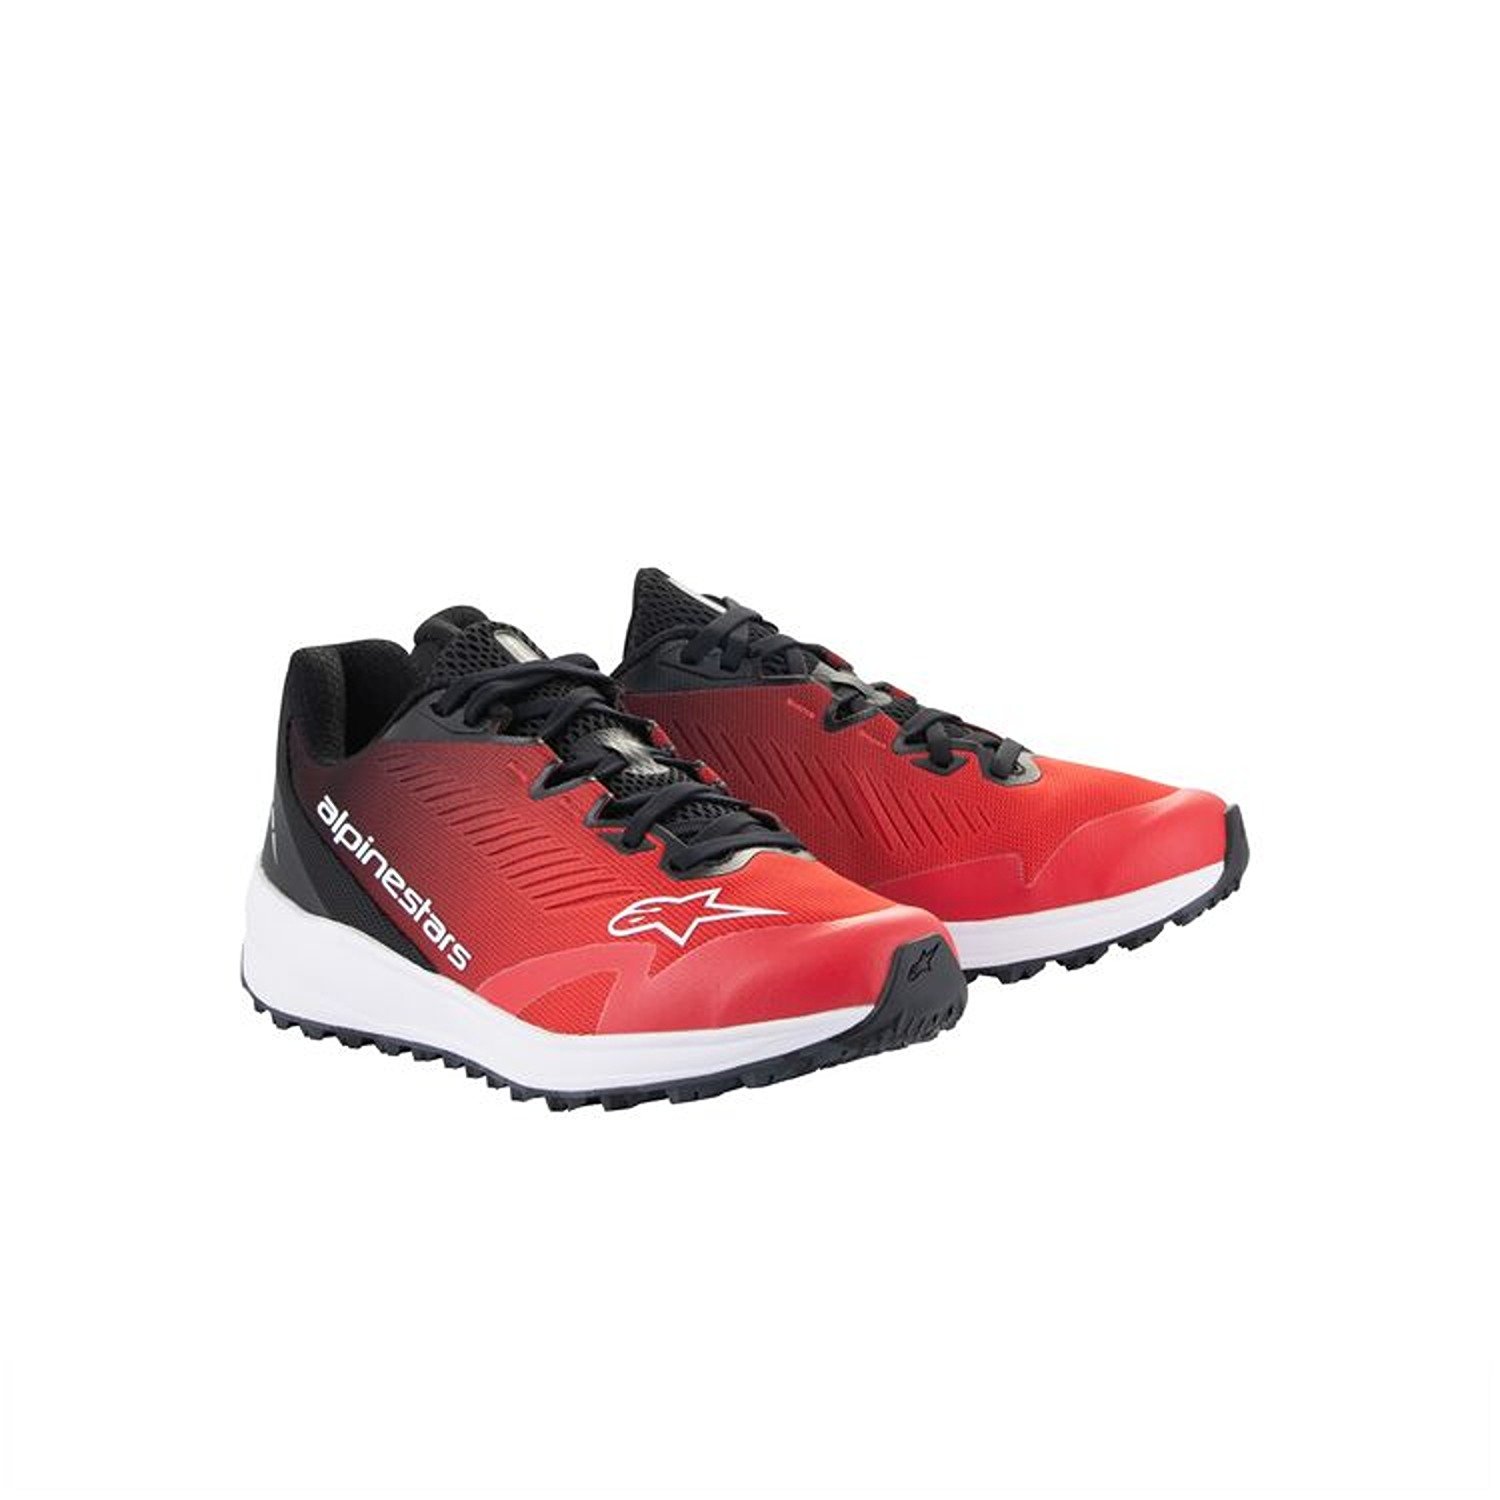 Image of Alpinestars Meta Road V2 Shoes Red Black White Taille US 4